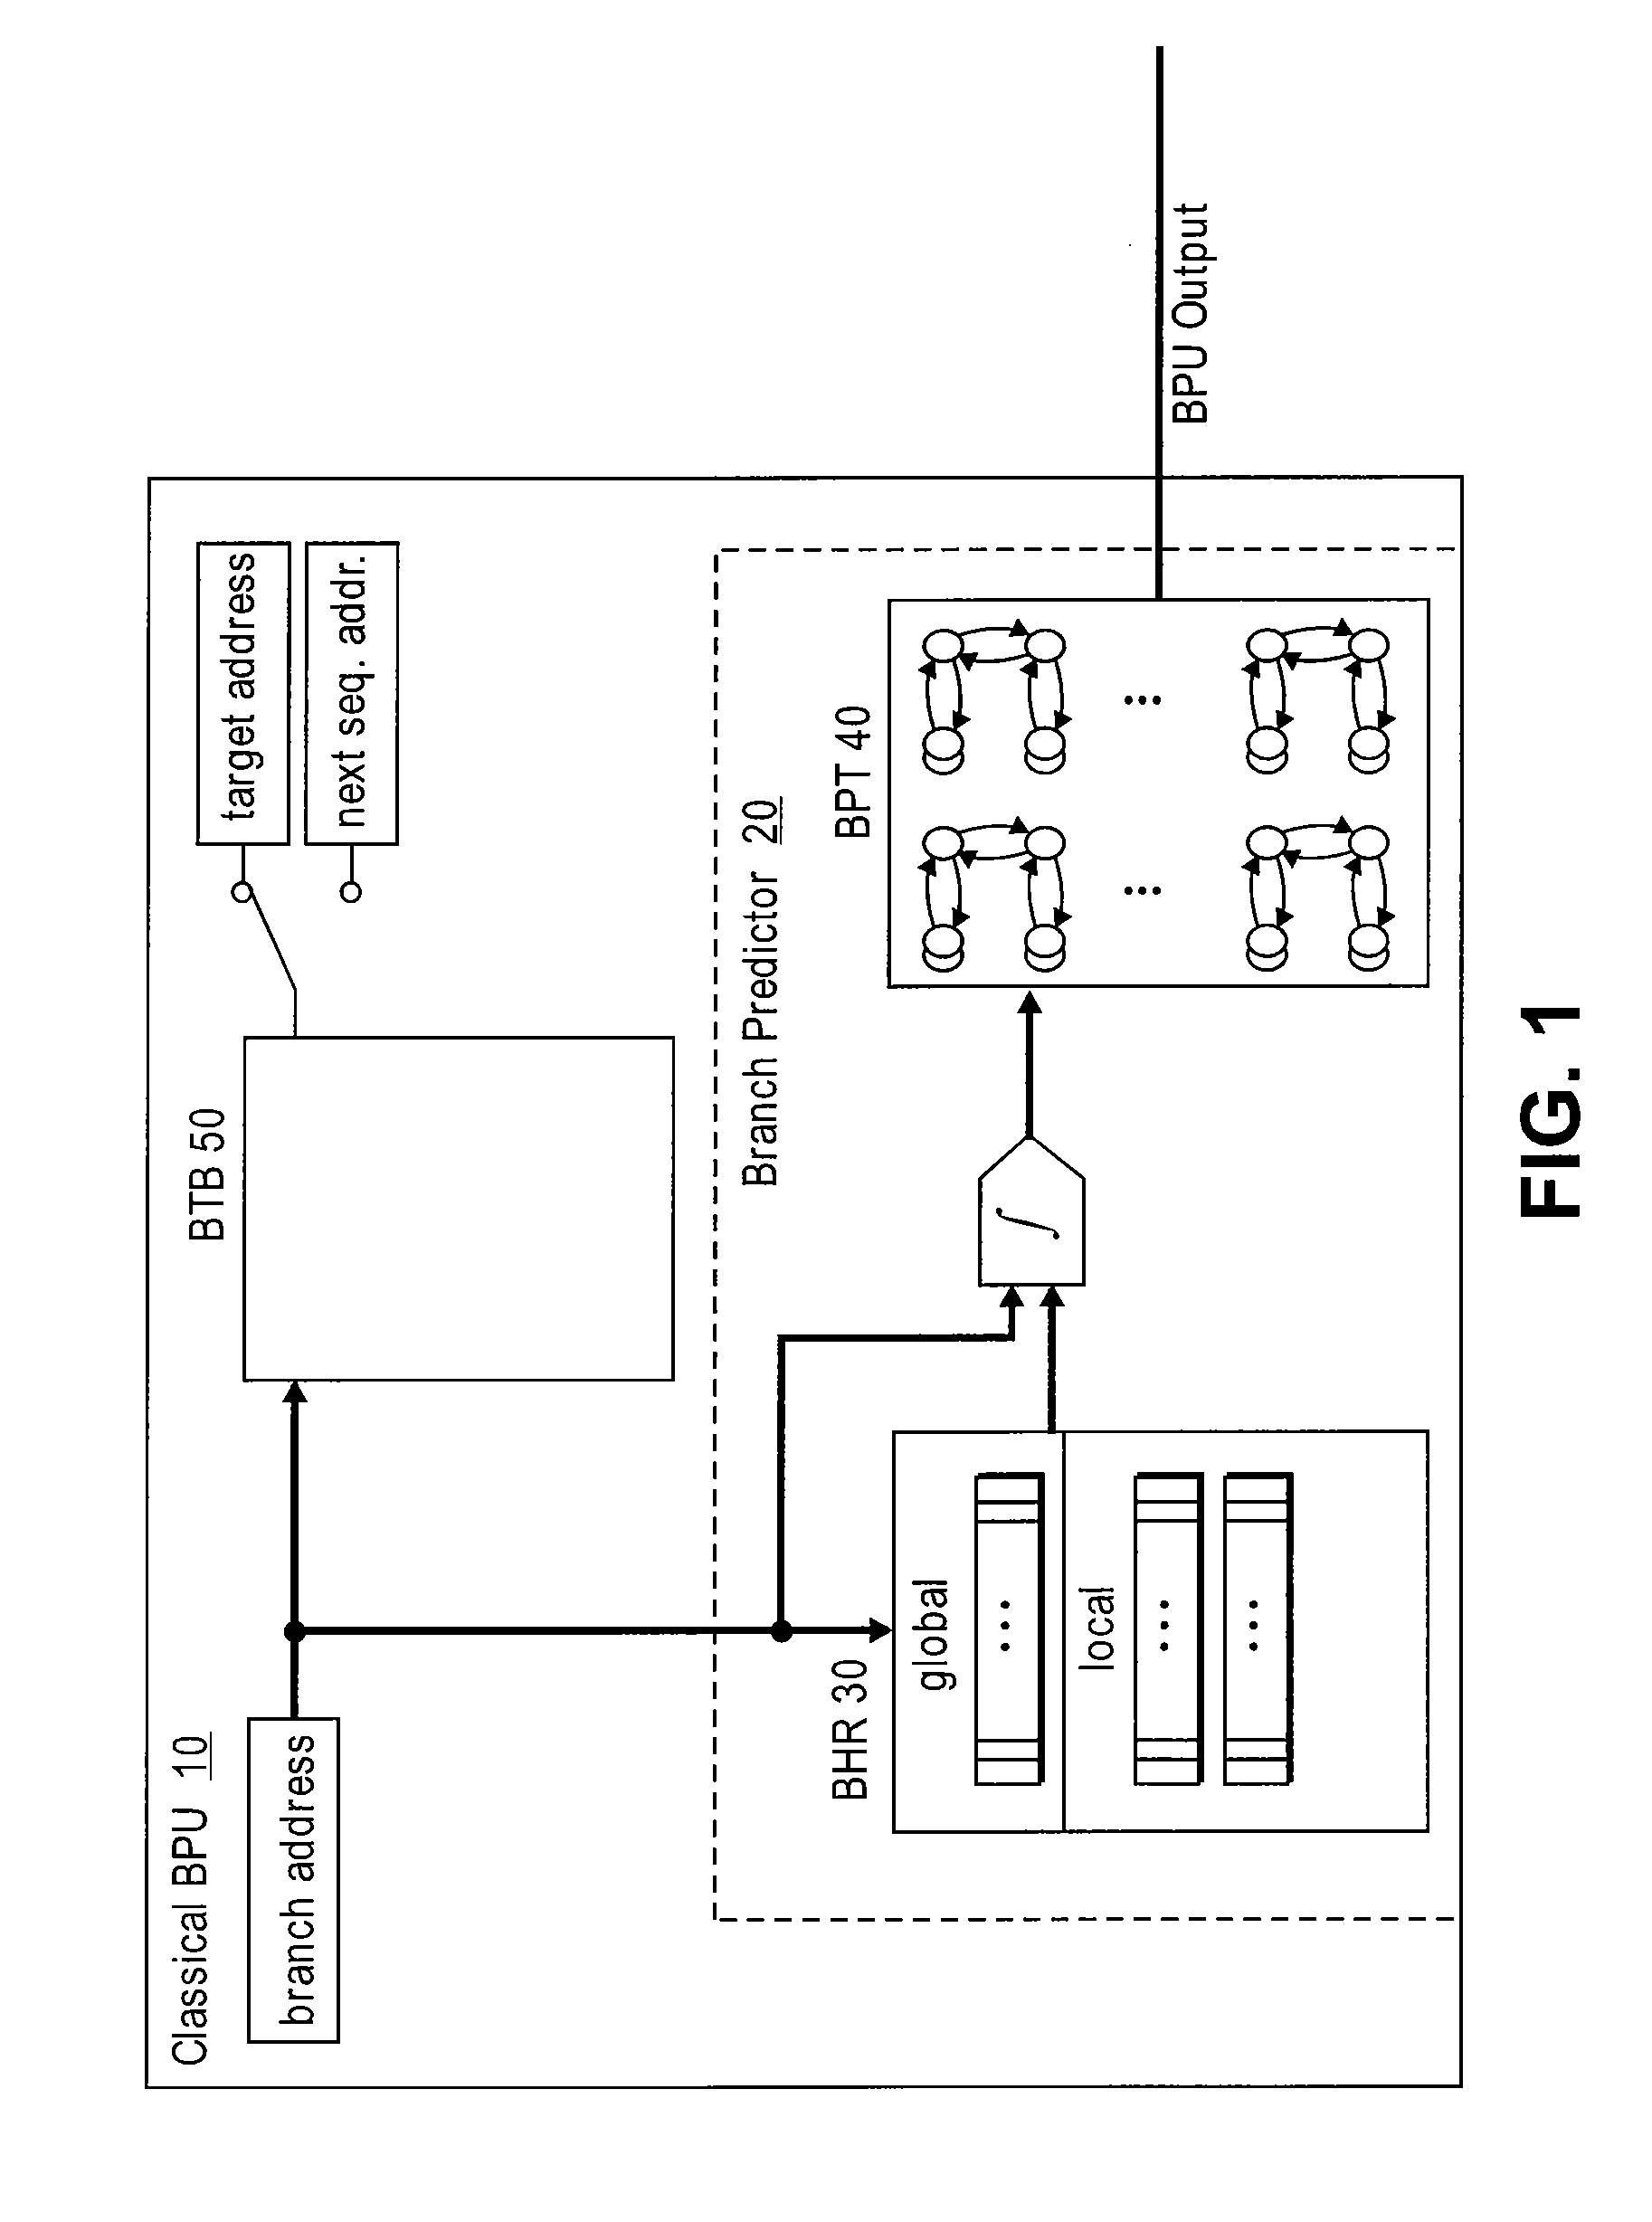 Systems and methods for providing security for computer systems